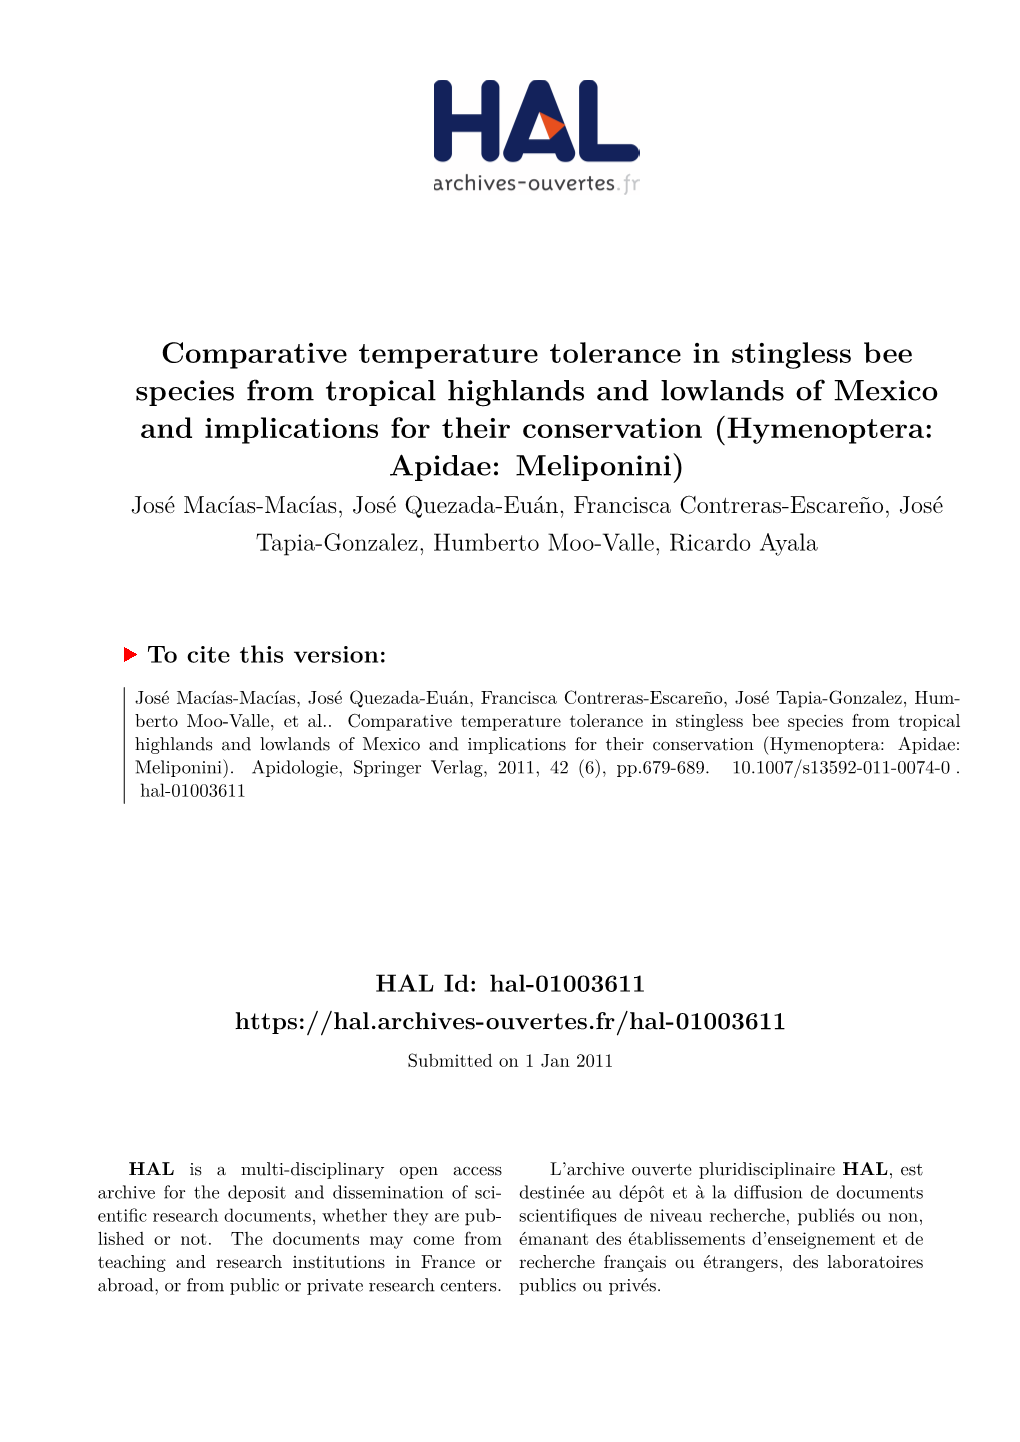 Comparative Temperature Tolerance in Stingless Bee Species from Tropical